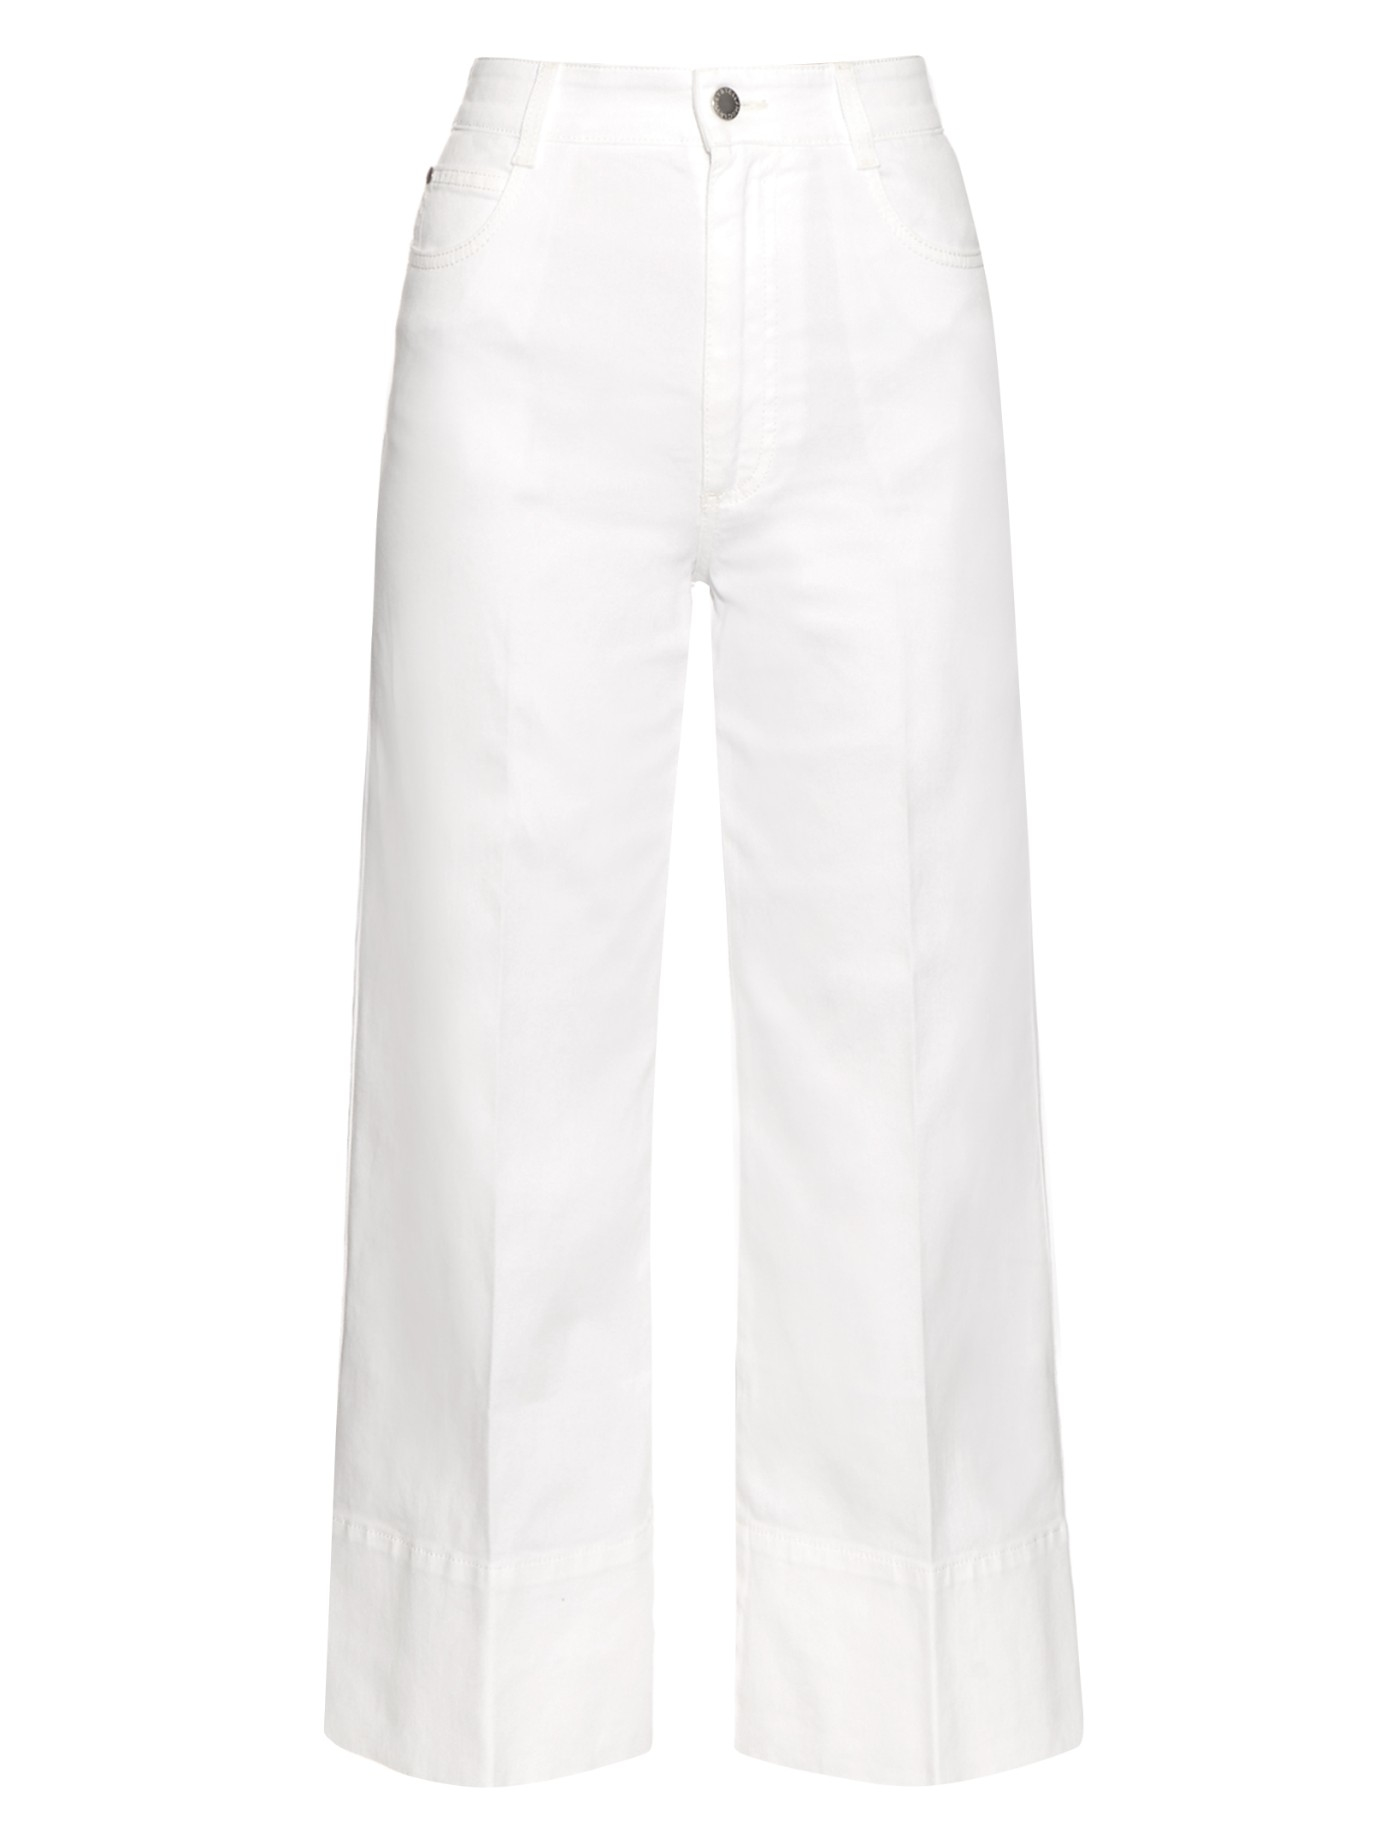 Stella mccartney High-rise Wide-leg Cropped Jeans in White | Lyst